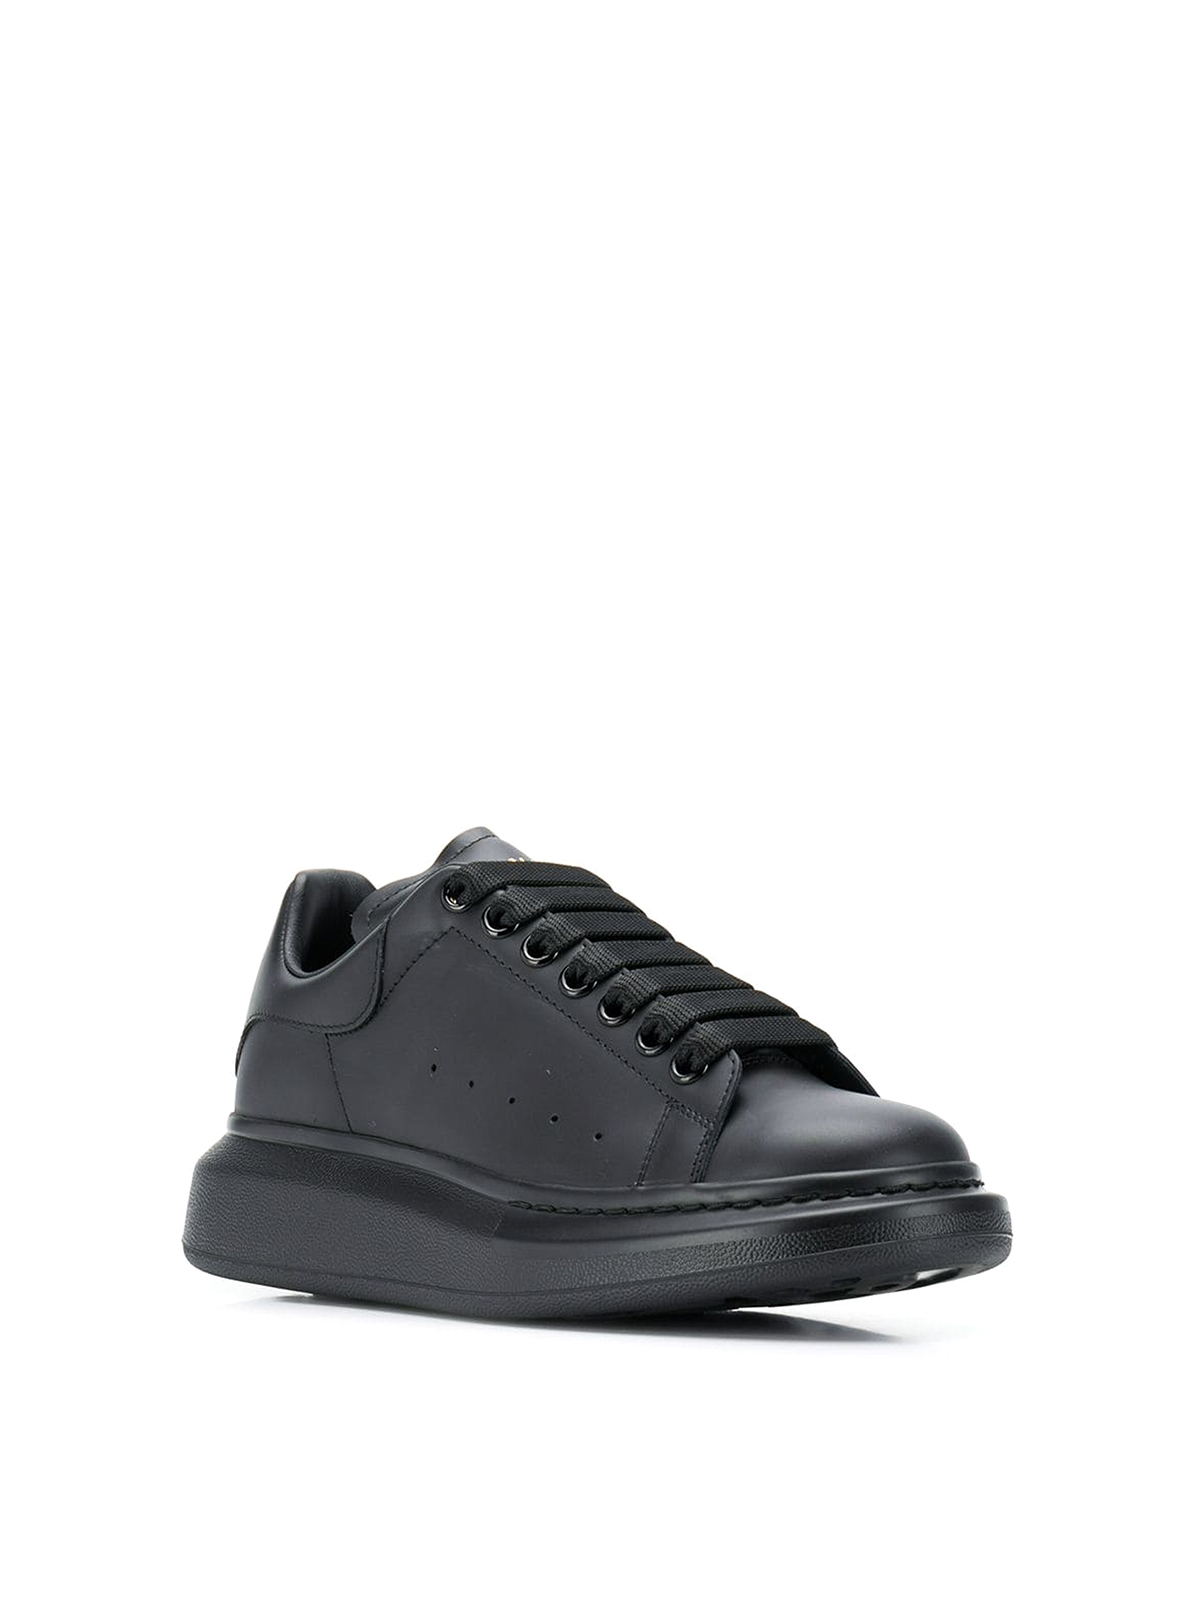 Oversized Sneakers - Alexander McQueen - White/Black - Leather